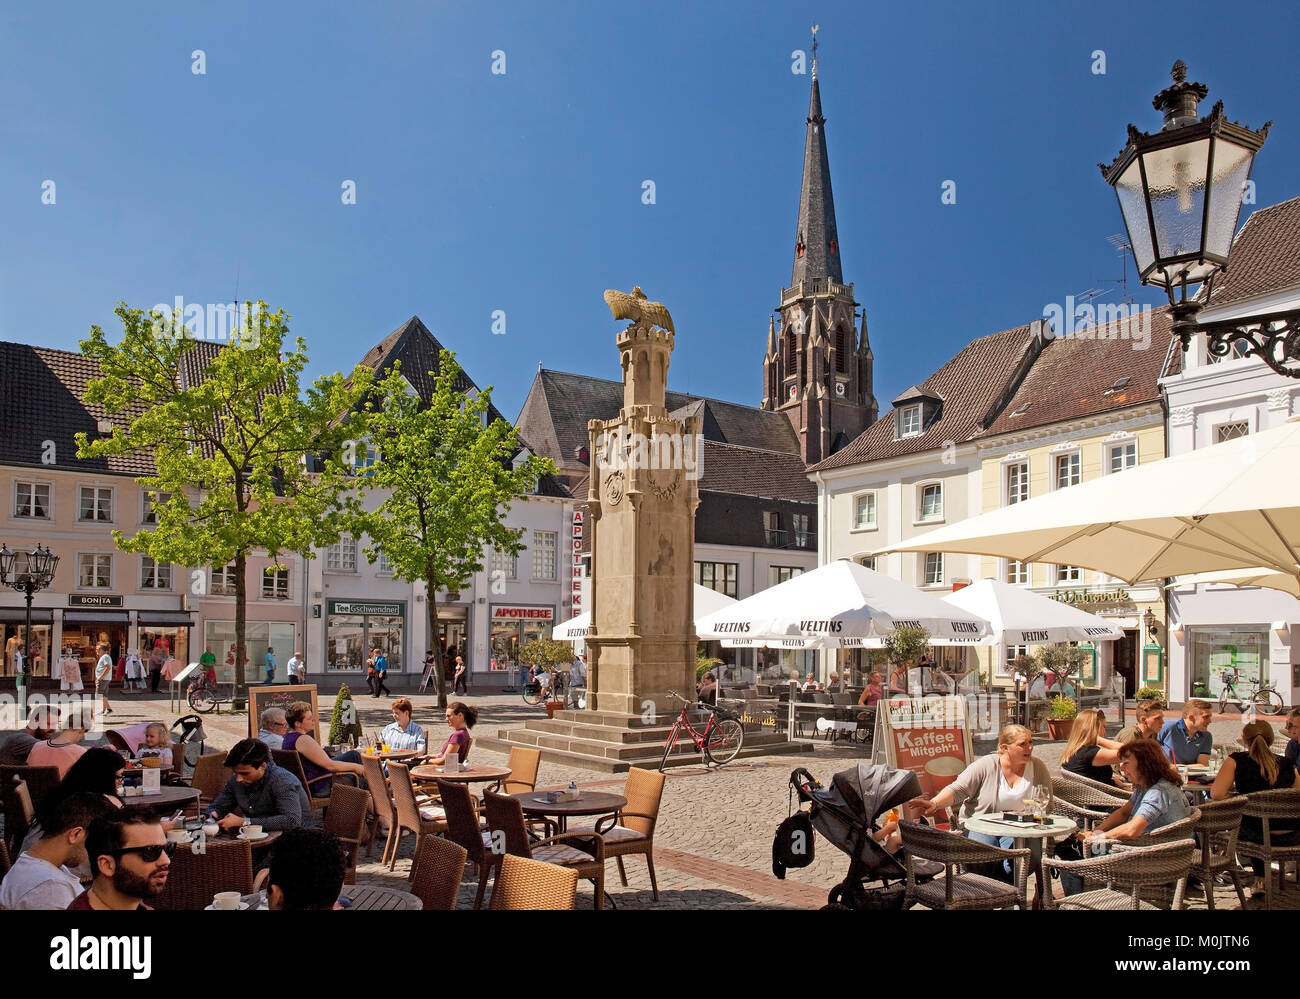 Outdoor gastronomy at the Altmarkt, Moers, Ruhr Area, North Rhine-Westphalia, Germany Stock Photo